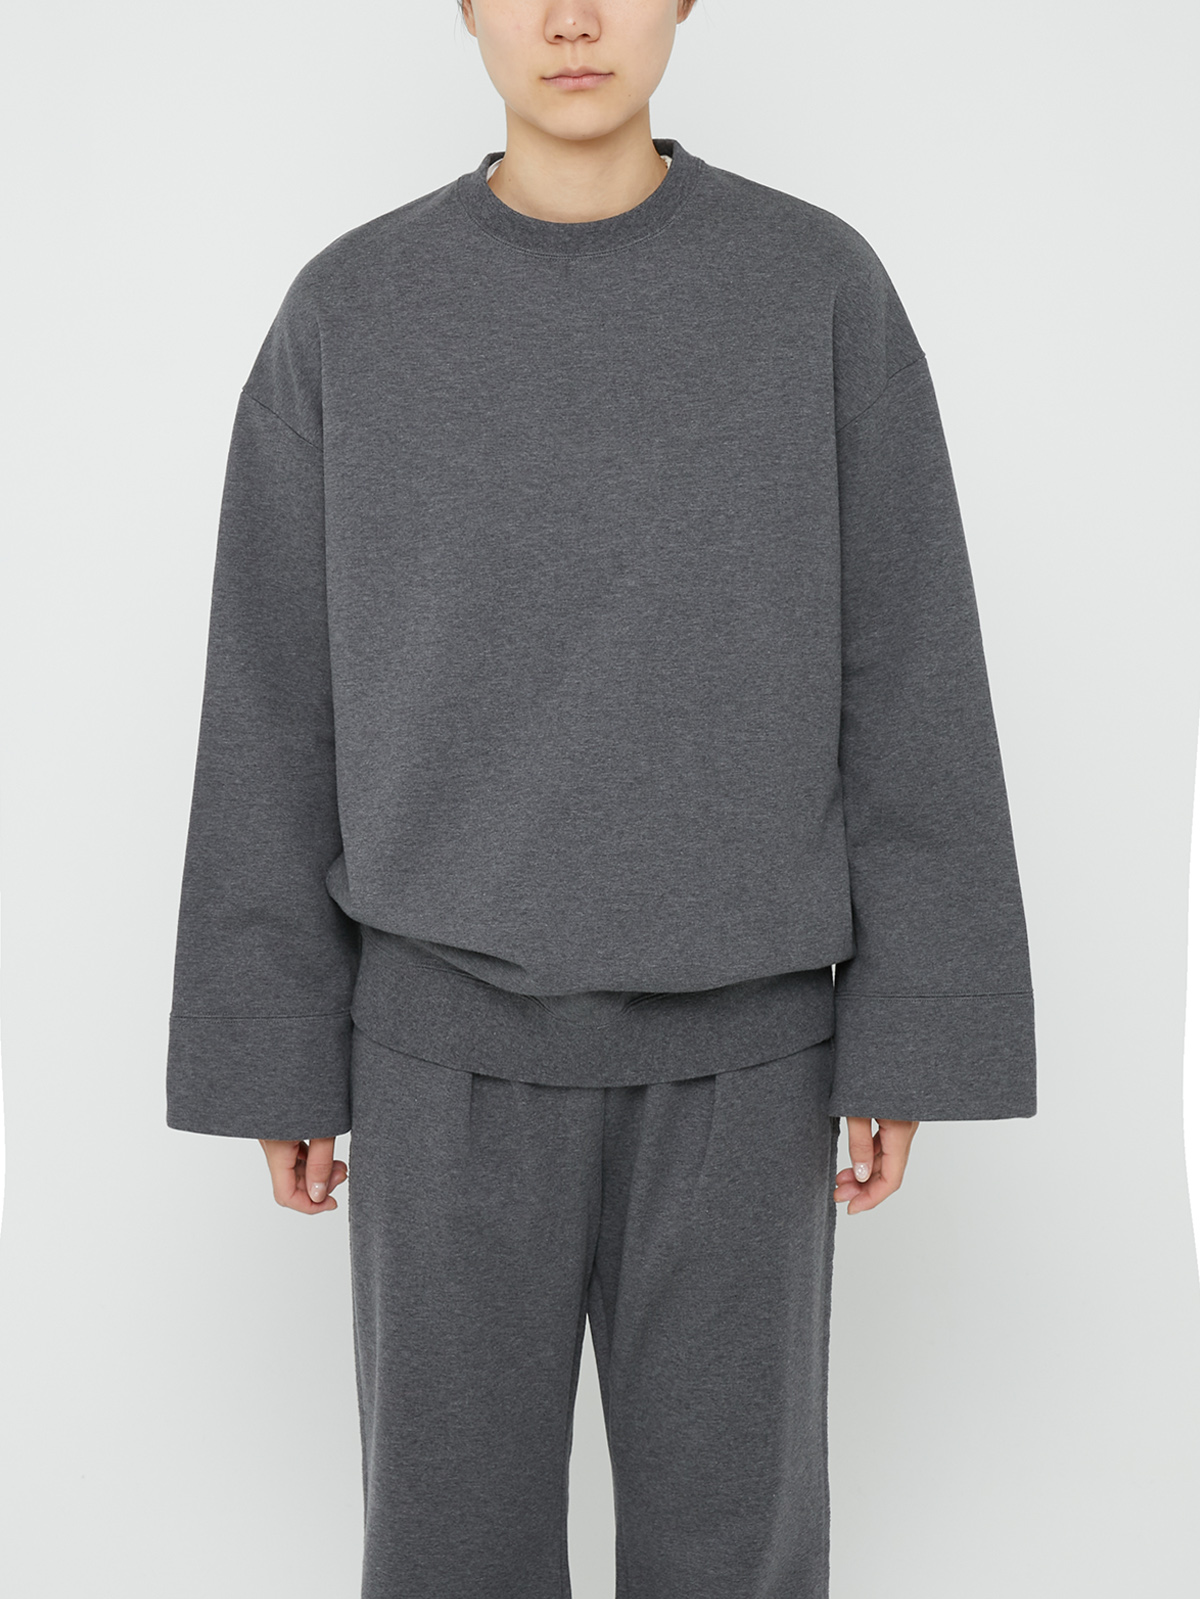 ULTRA COMPACT TERRY CREW NECK (H.CHARCOAL)